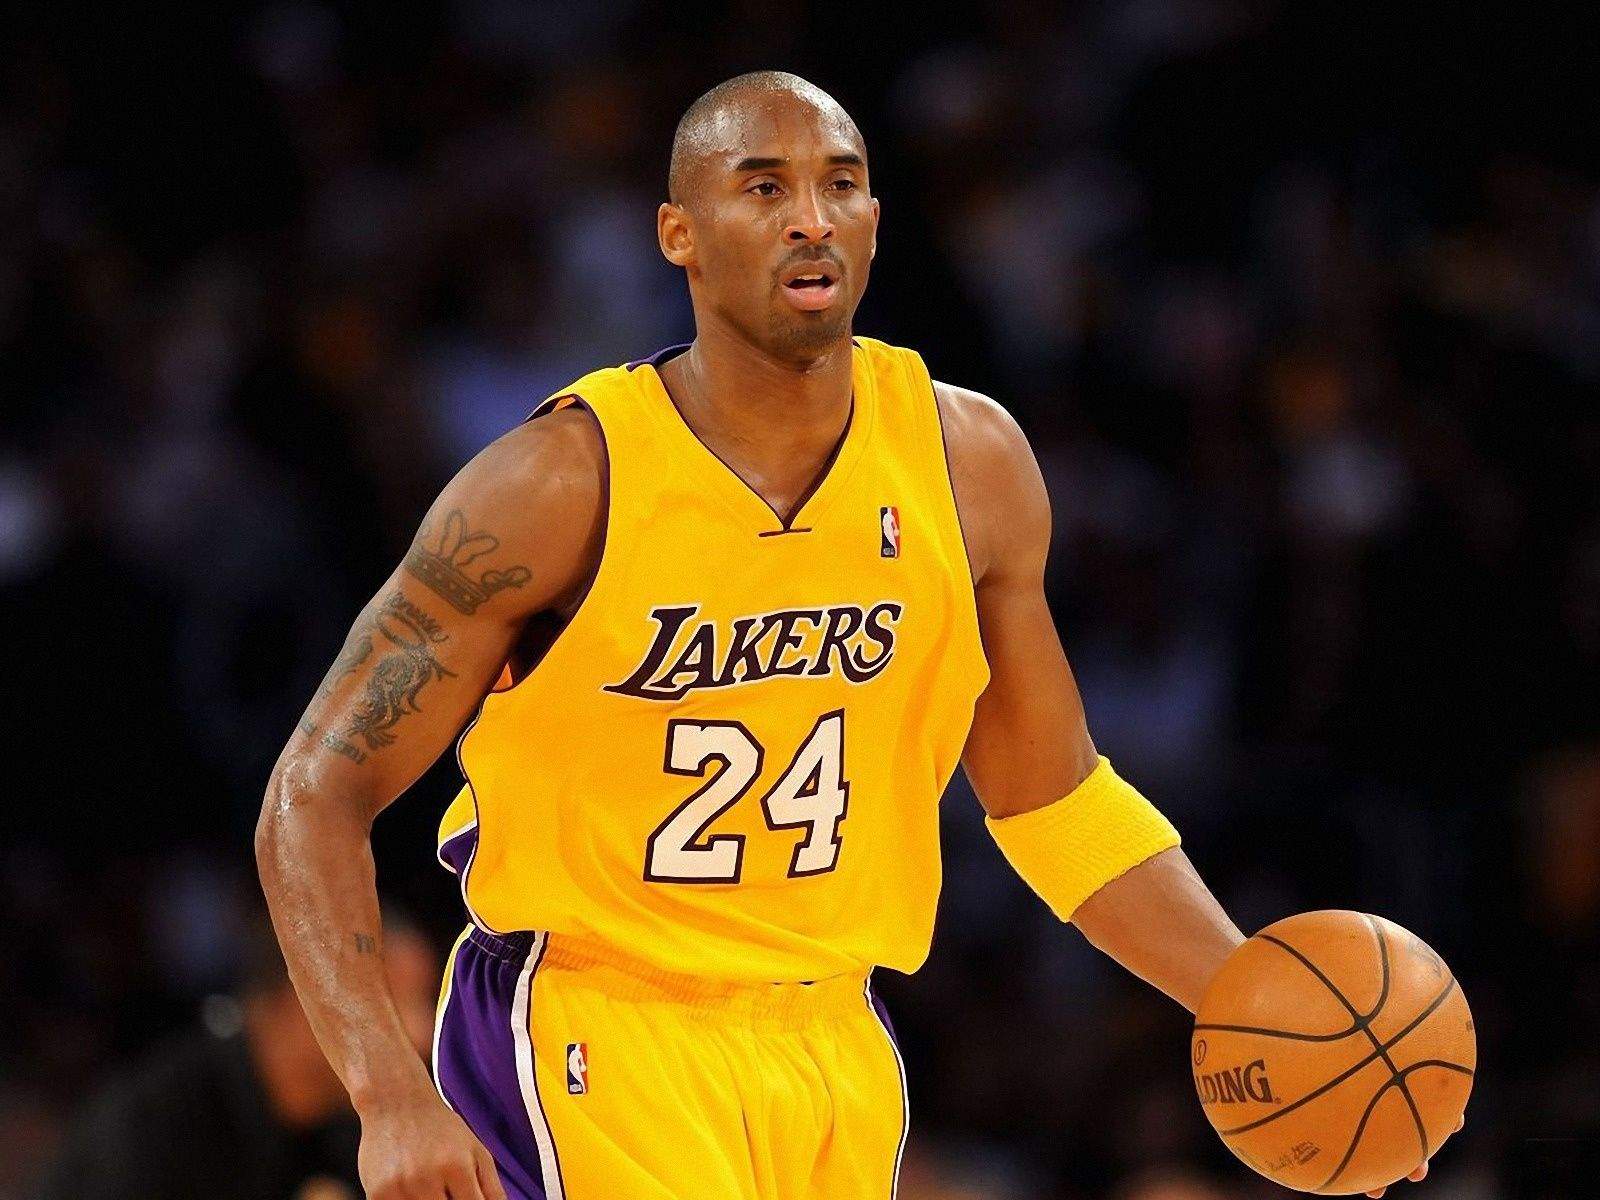 Kobe Bryant met with Jony Ive to discuss design and hoops